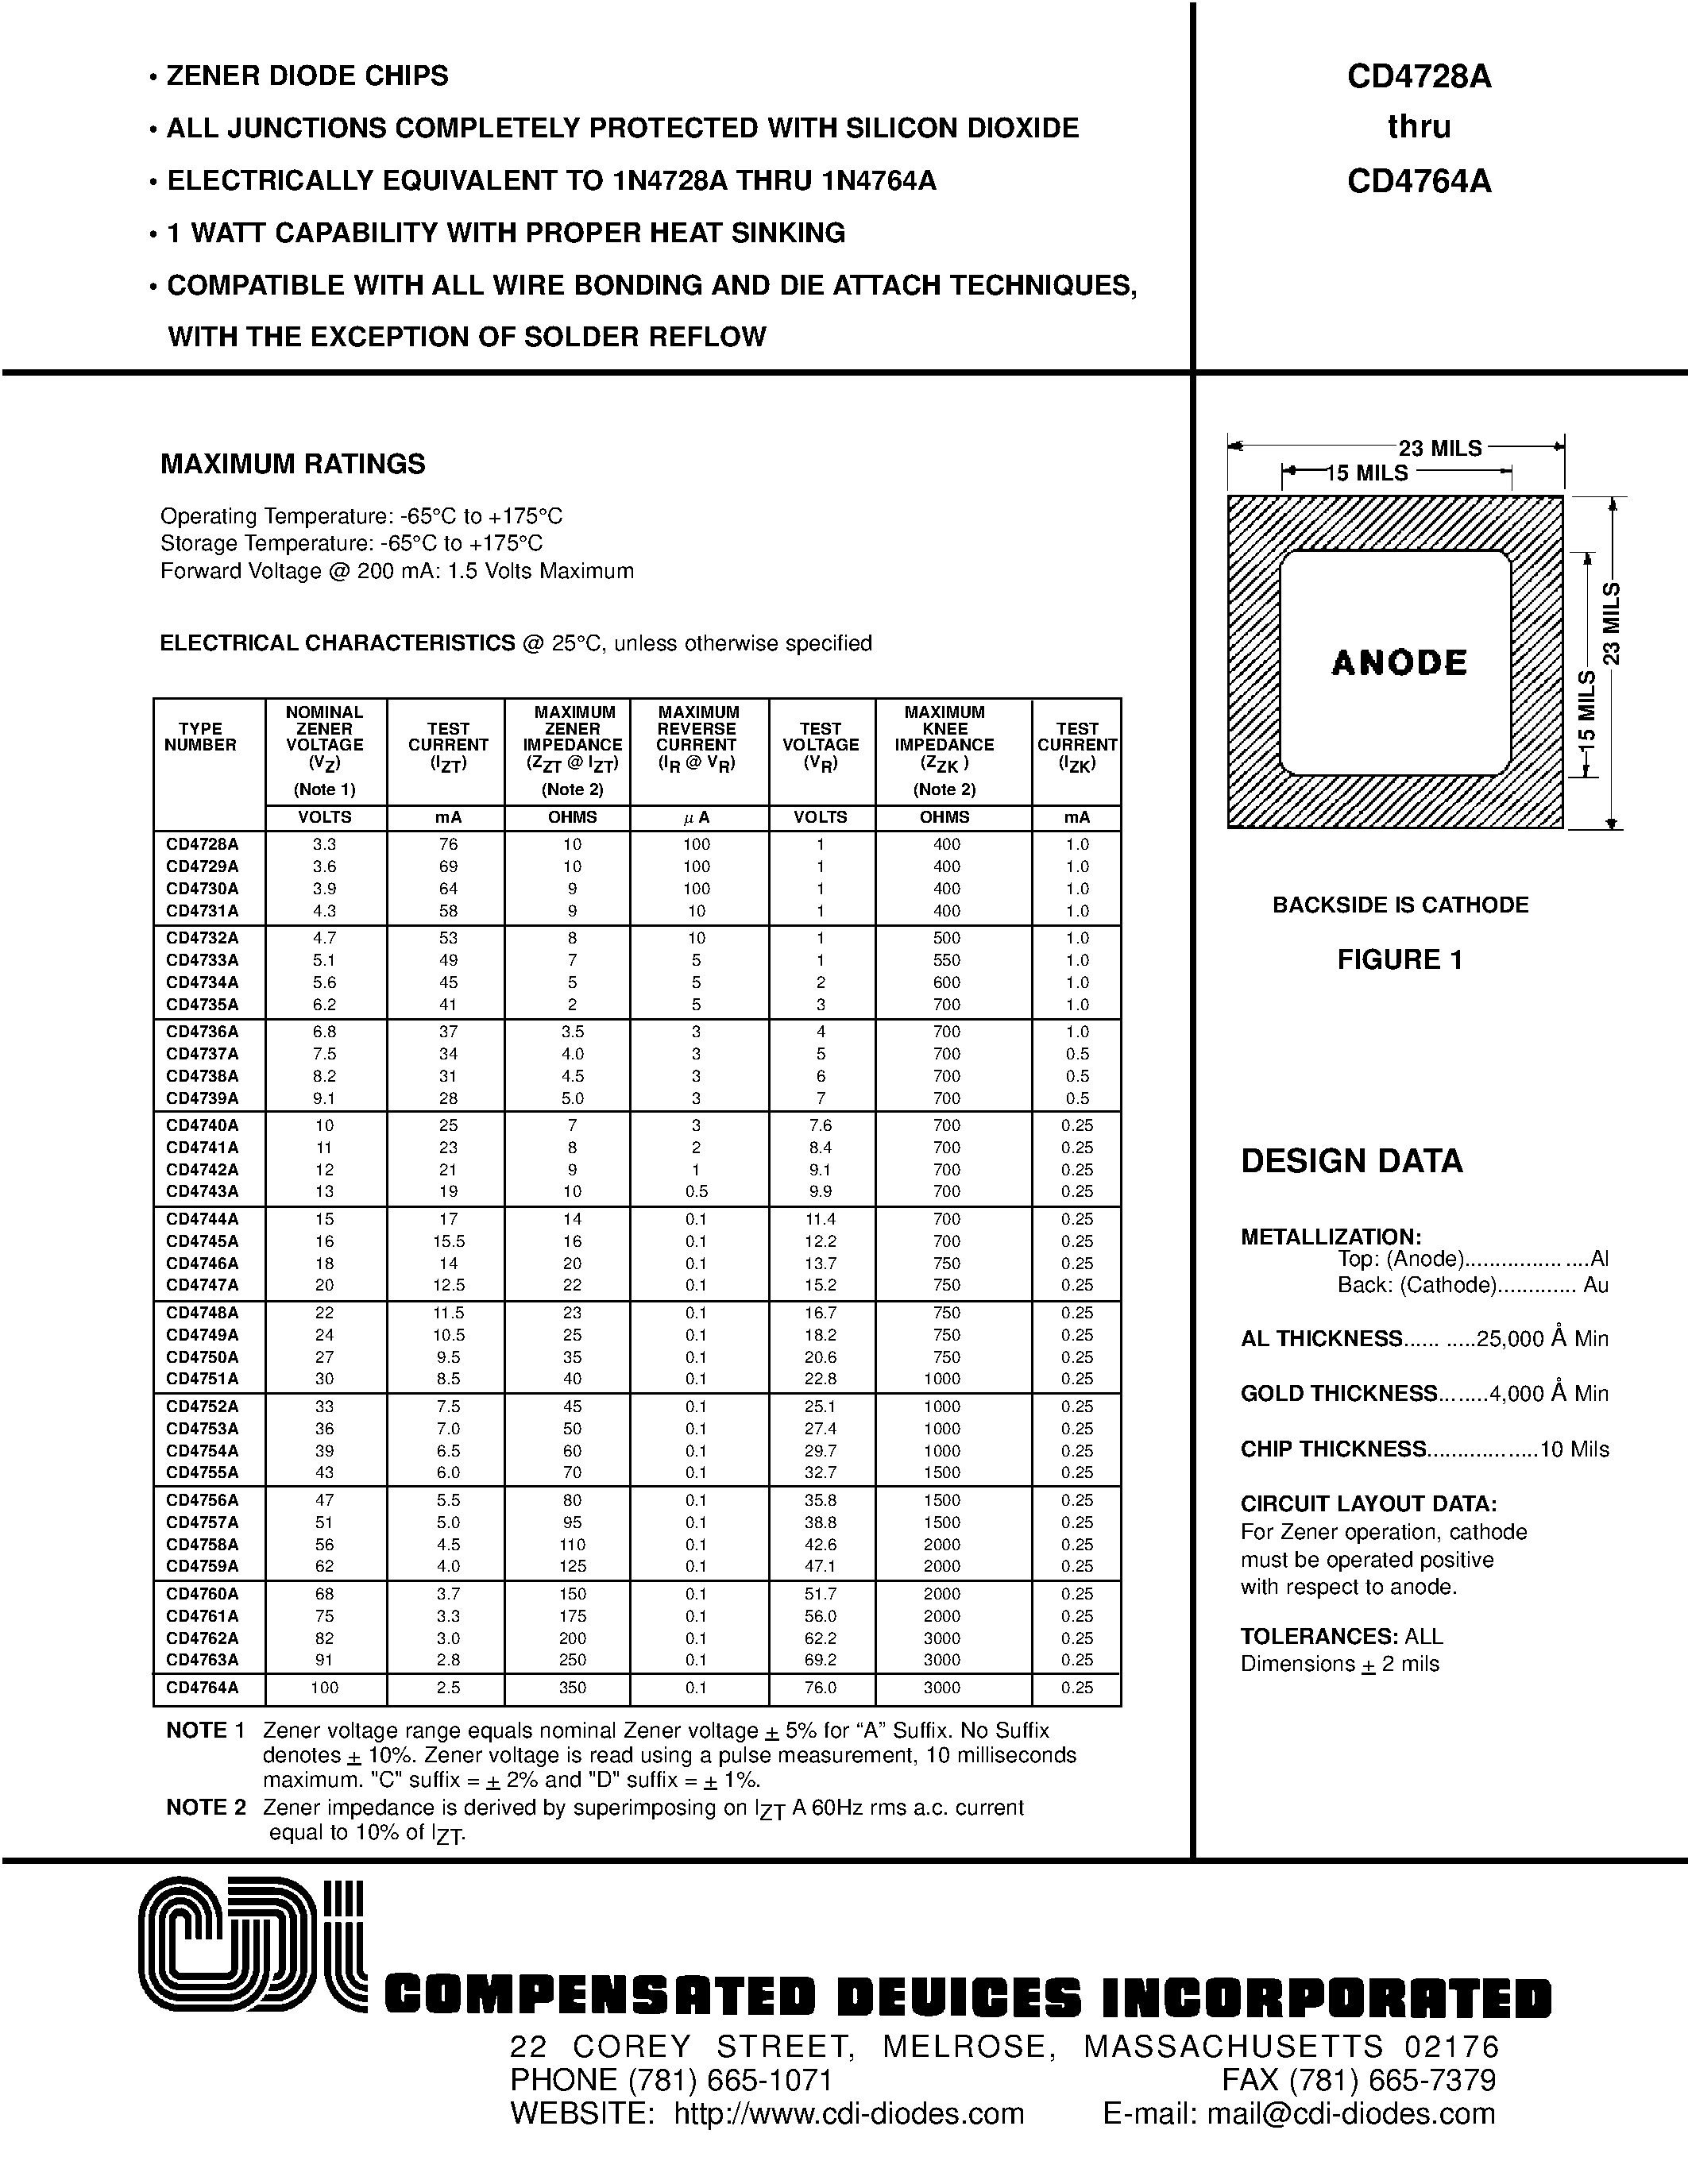 Datasheet CD4743A - ZENER DIODE CHIPS page 1